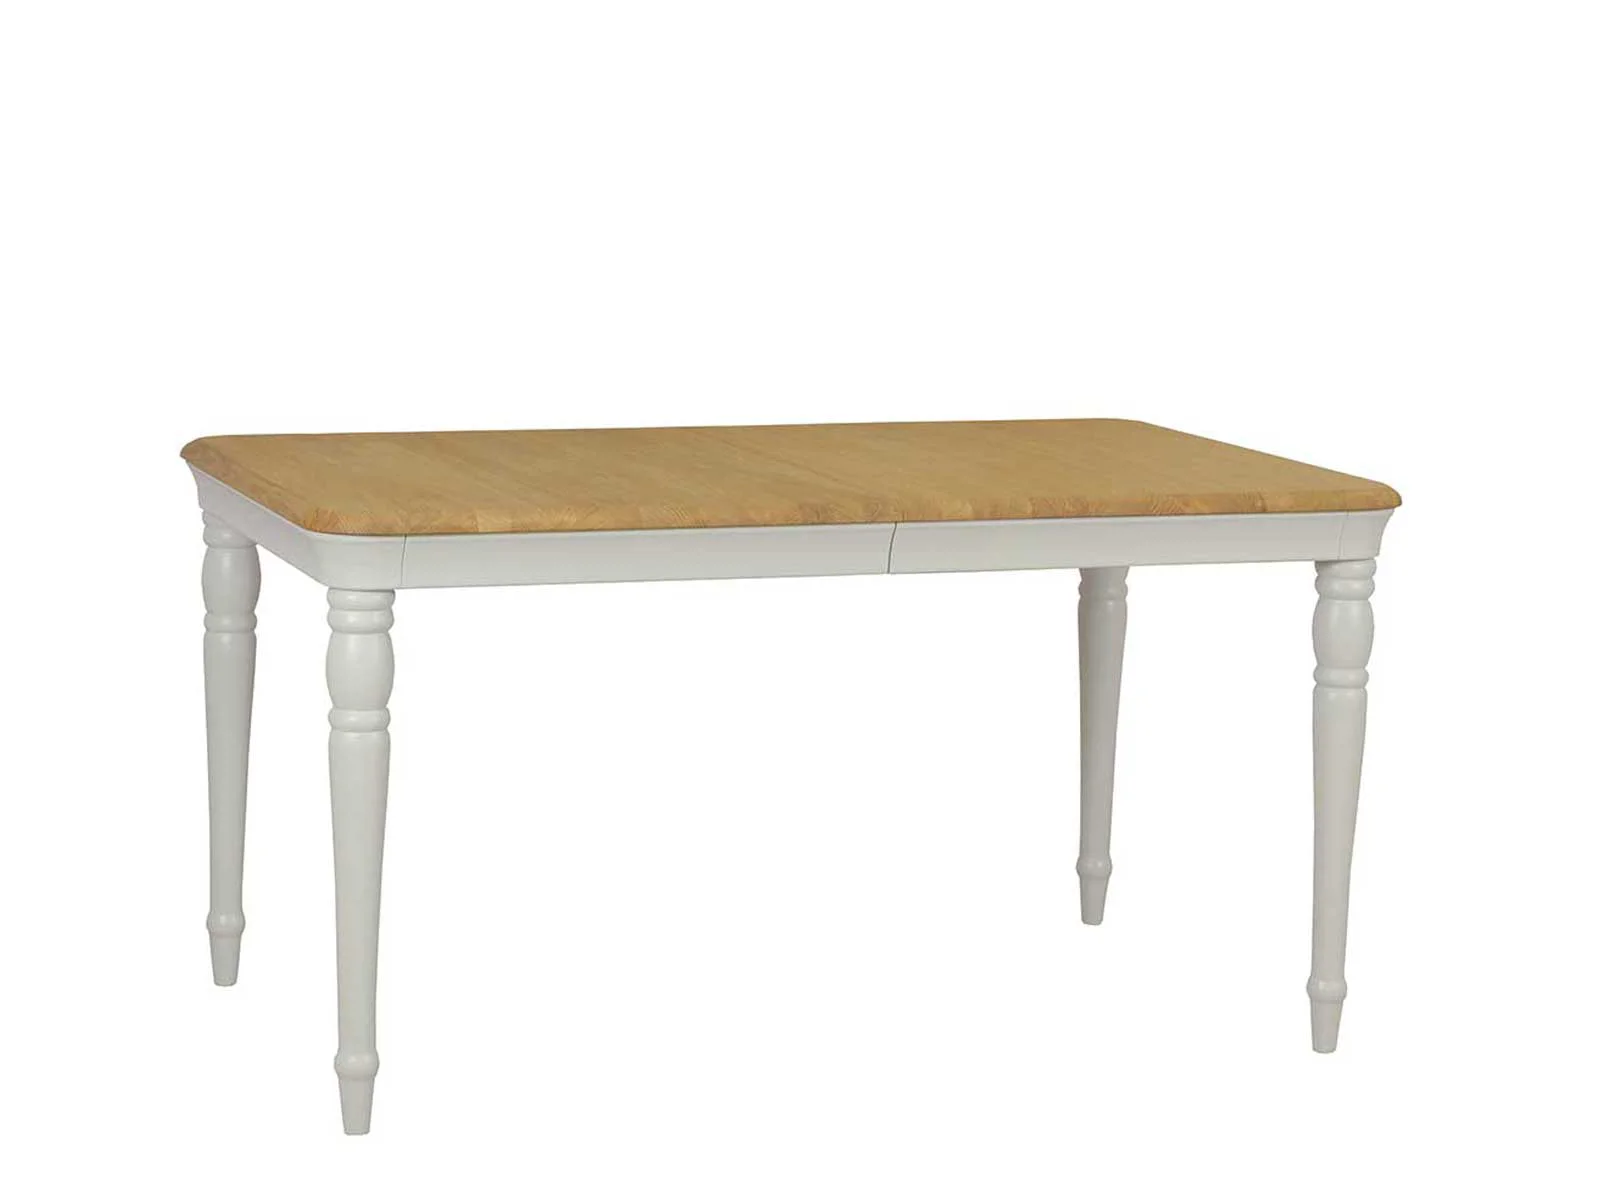 Extending Dining Table From 180-220Cm 